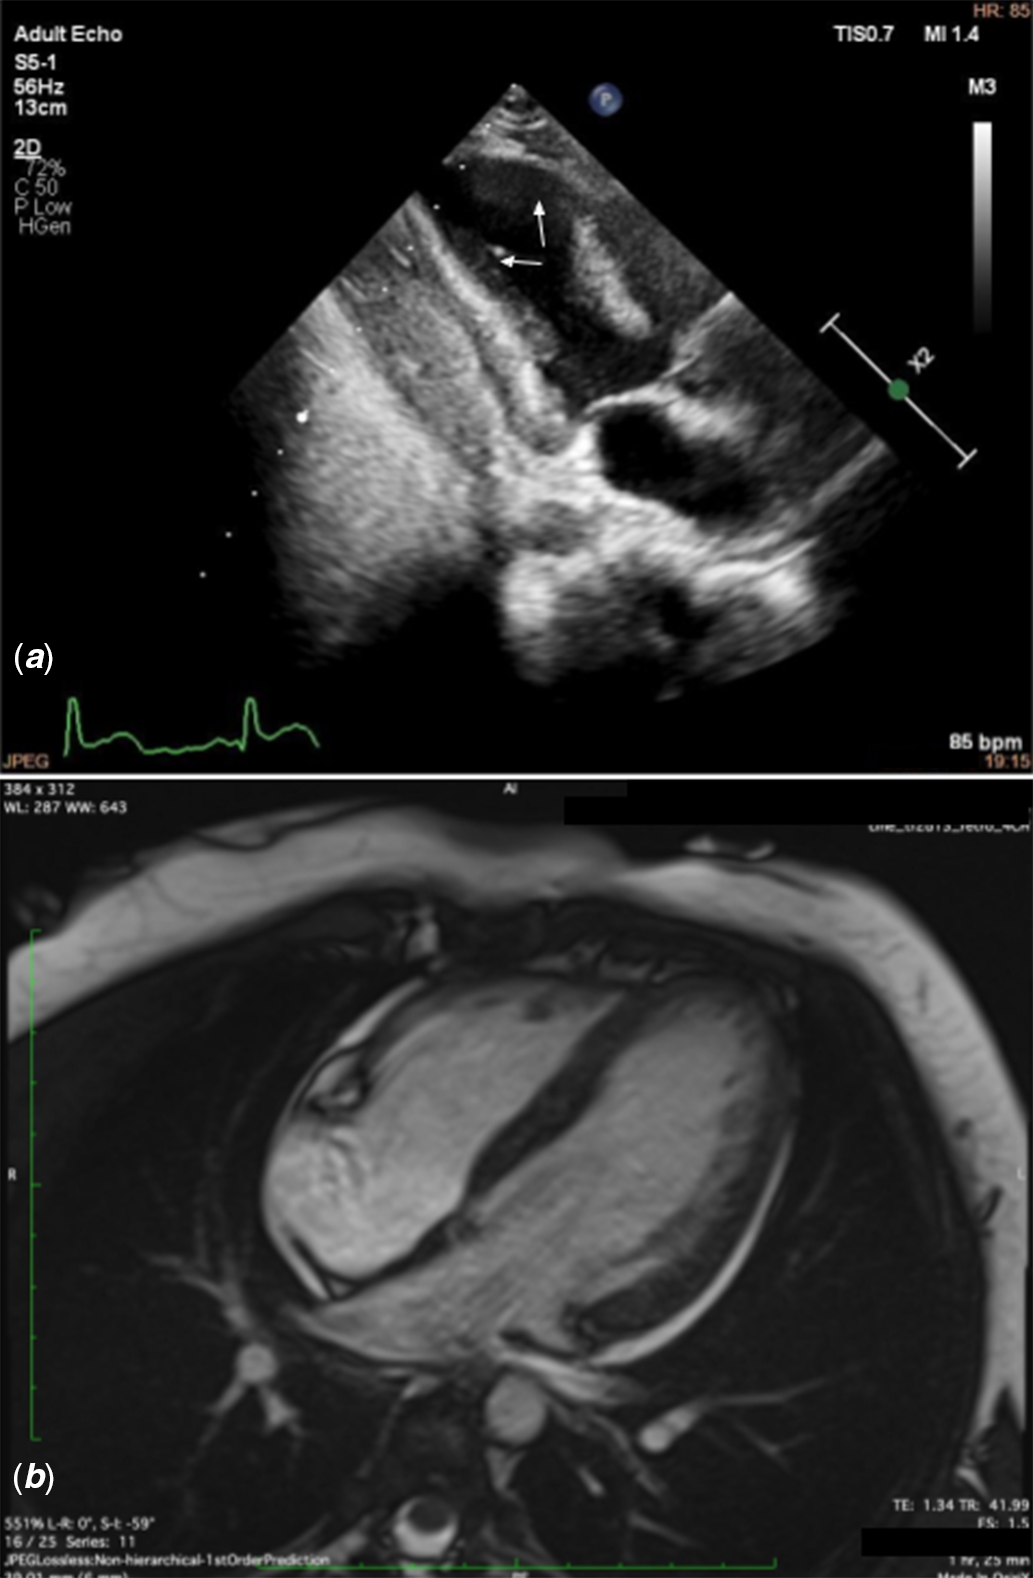 Figure 1: Clinical Course of LV Dysfunction in the Setting of Takotsubo  Cardiomyopathy